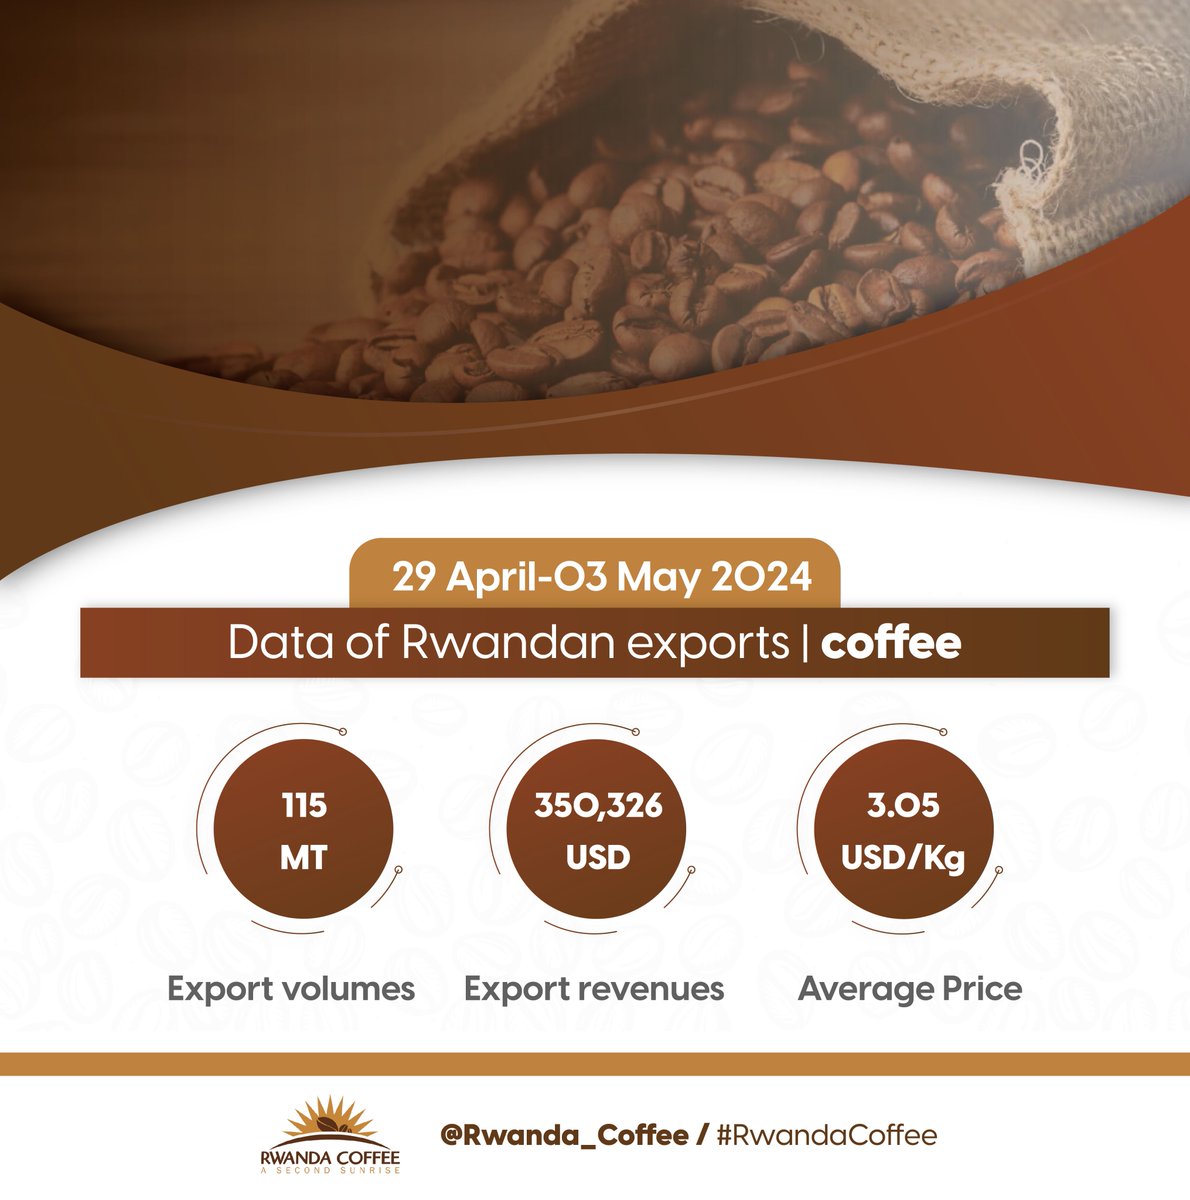 Rwandan coffee, renowned for its exceptional aroma and unique flavor, is making waves worldwide. Explore the detailed weekly coffee export data from April 29th to May 3rd, 2024 below, and watch out for our upcoming weekly update to stay informed. #RwandaAgriExports